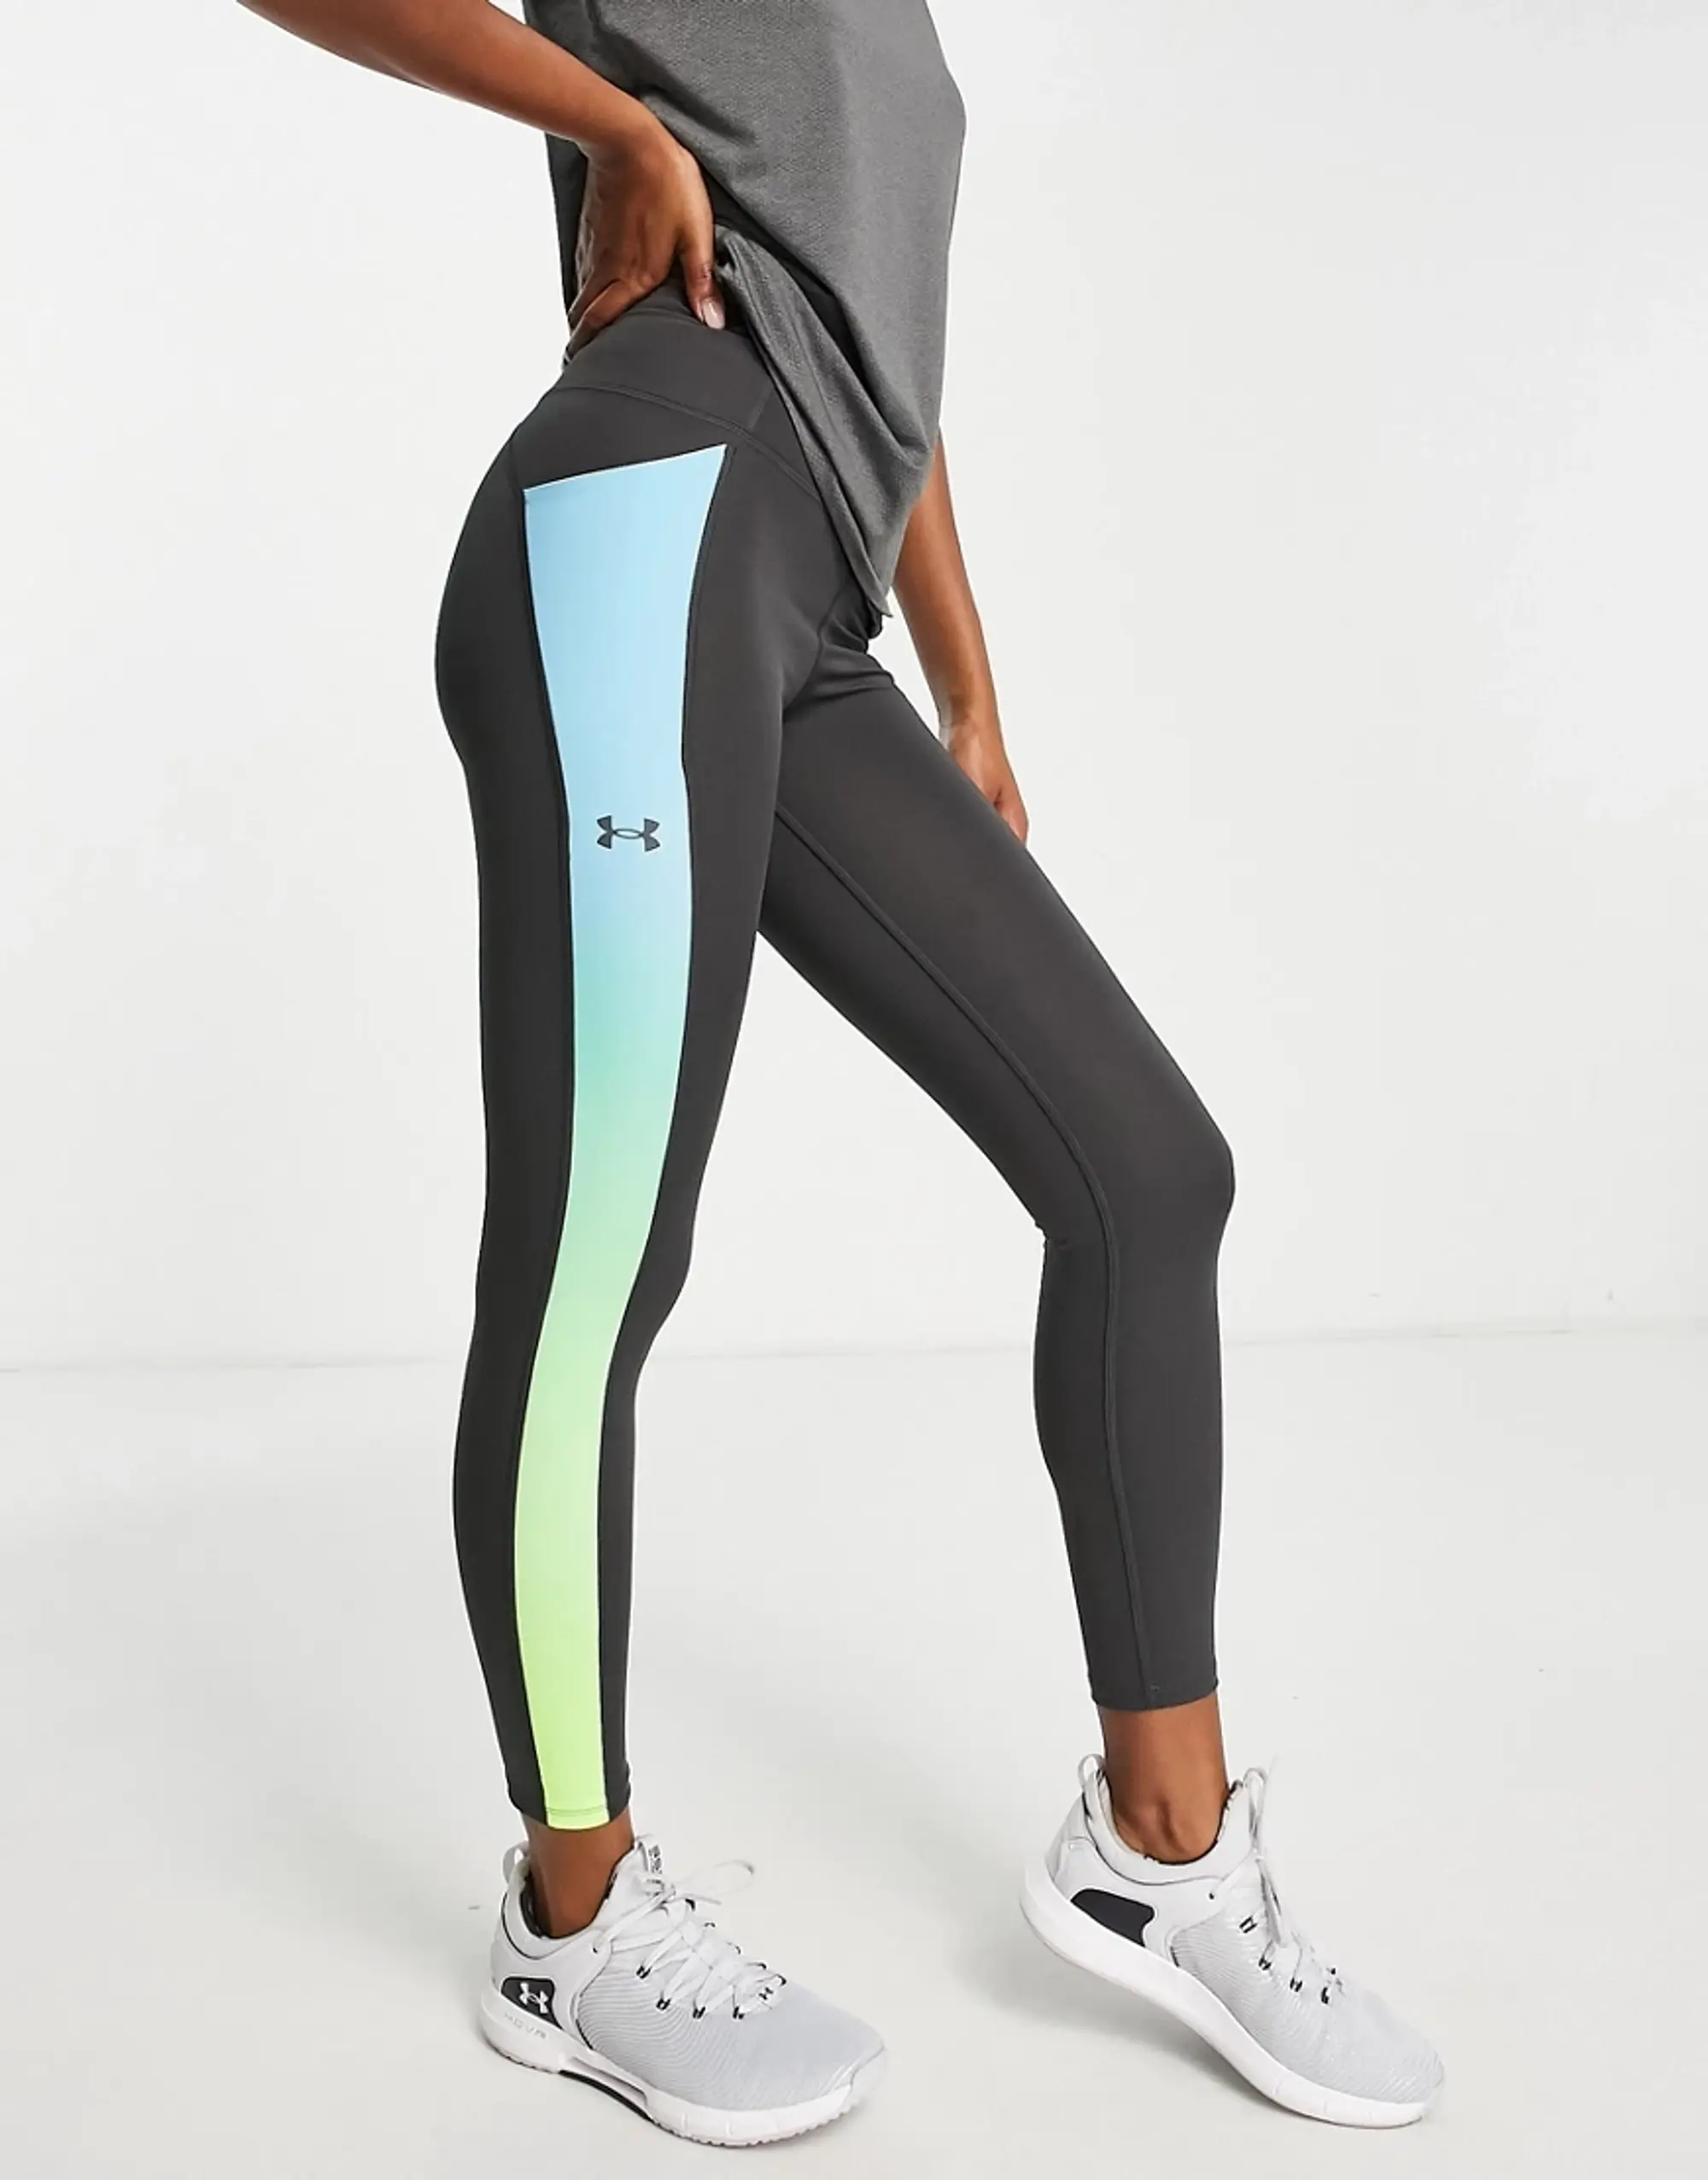 Under Armour Speed Pocket Leggings With Side Fade In Black, 1369755-010